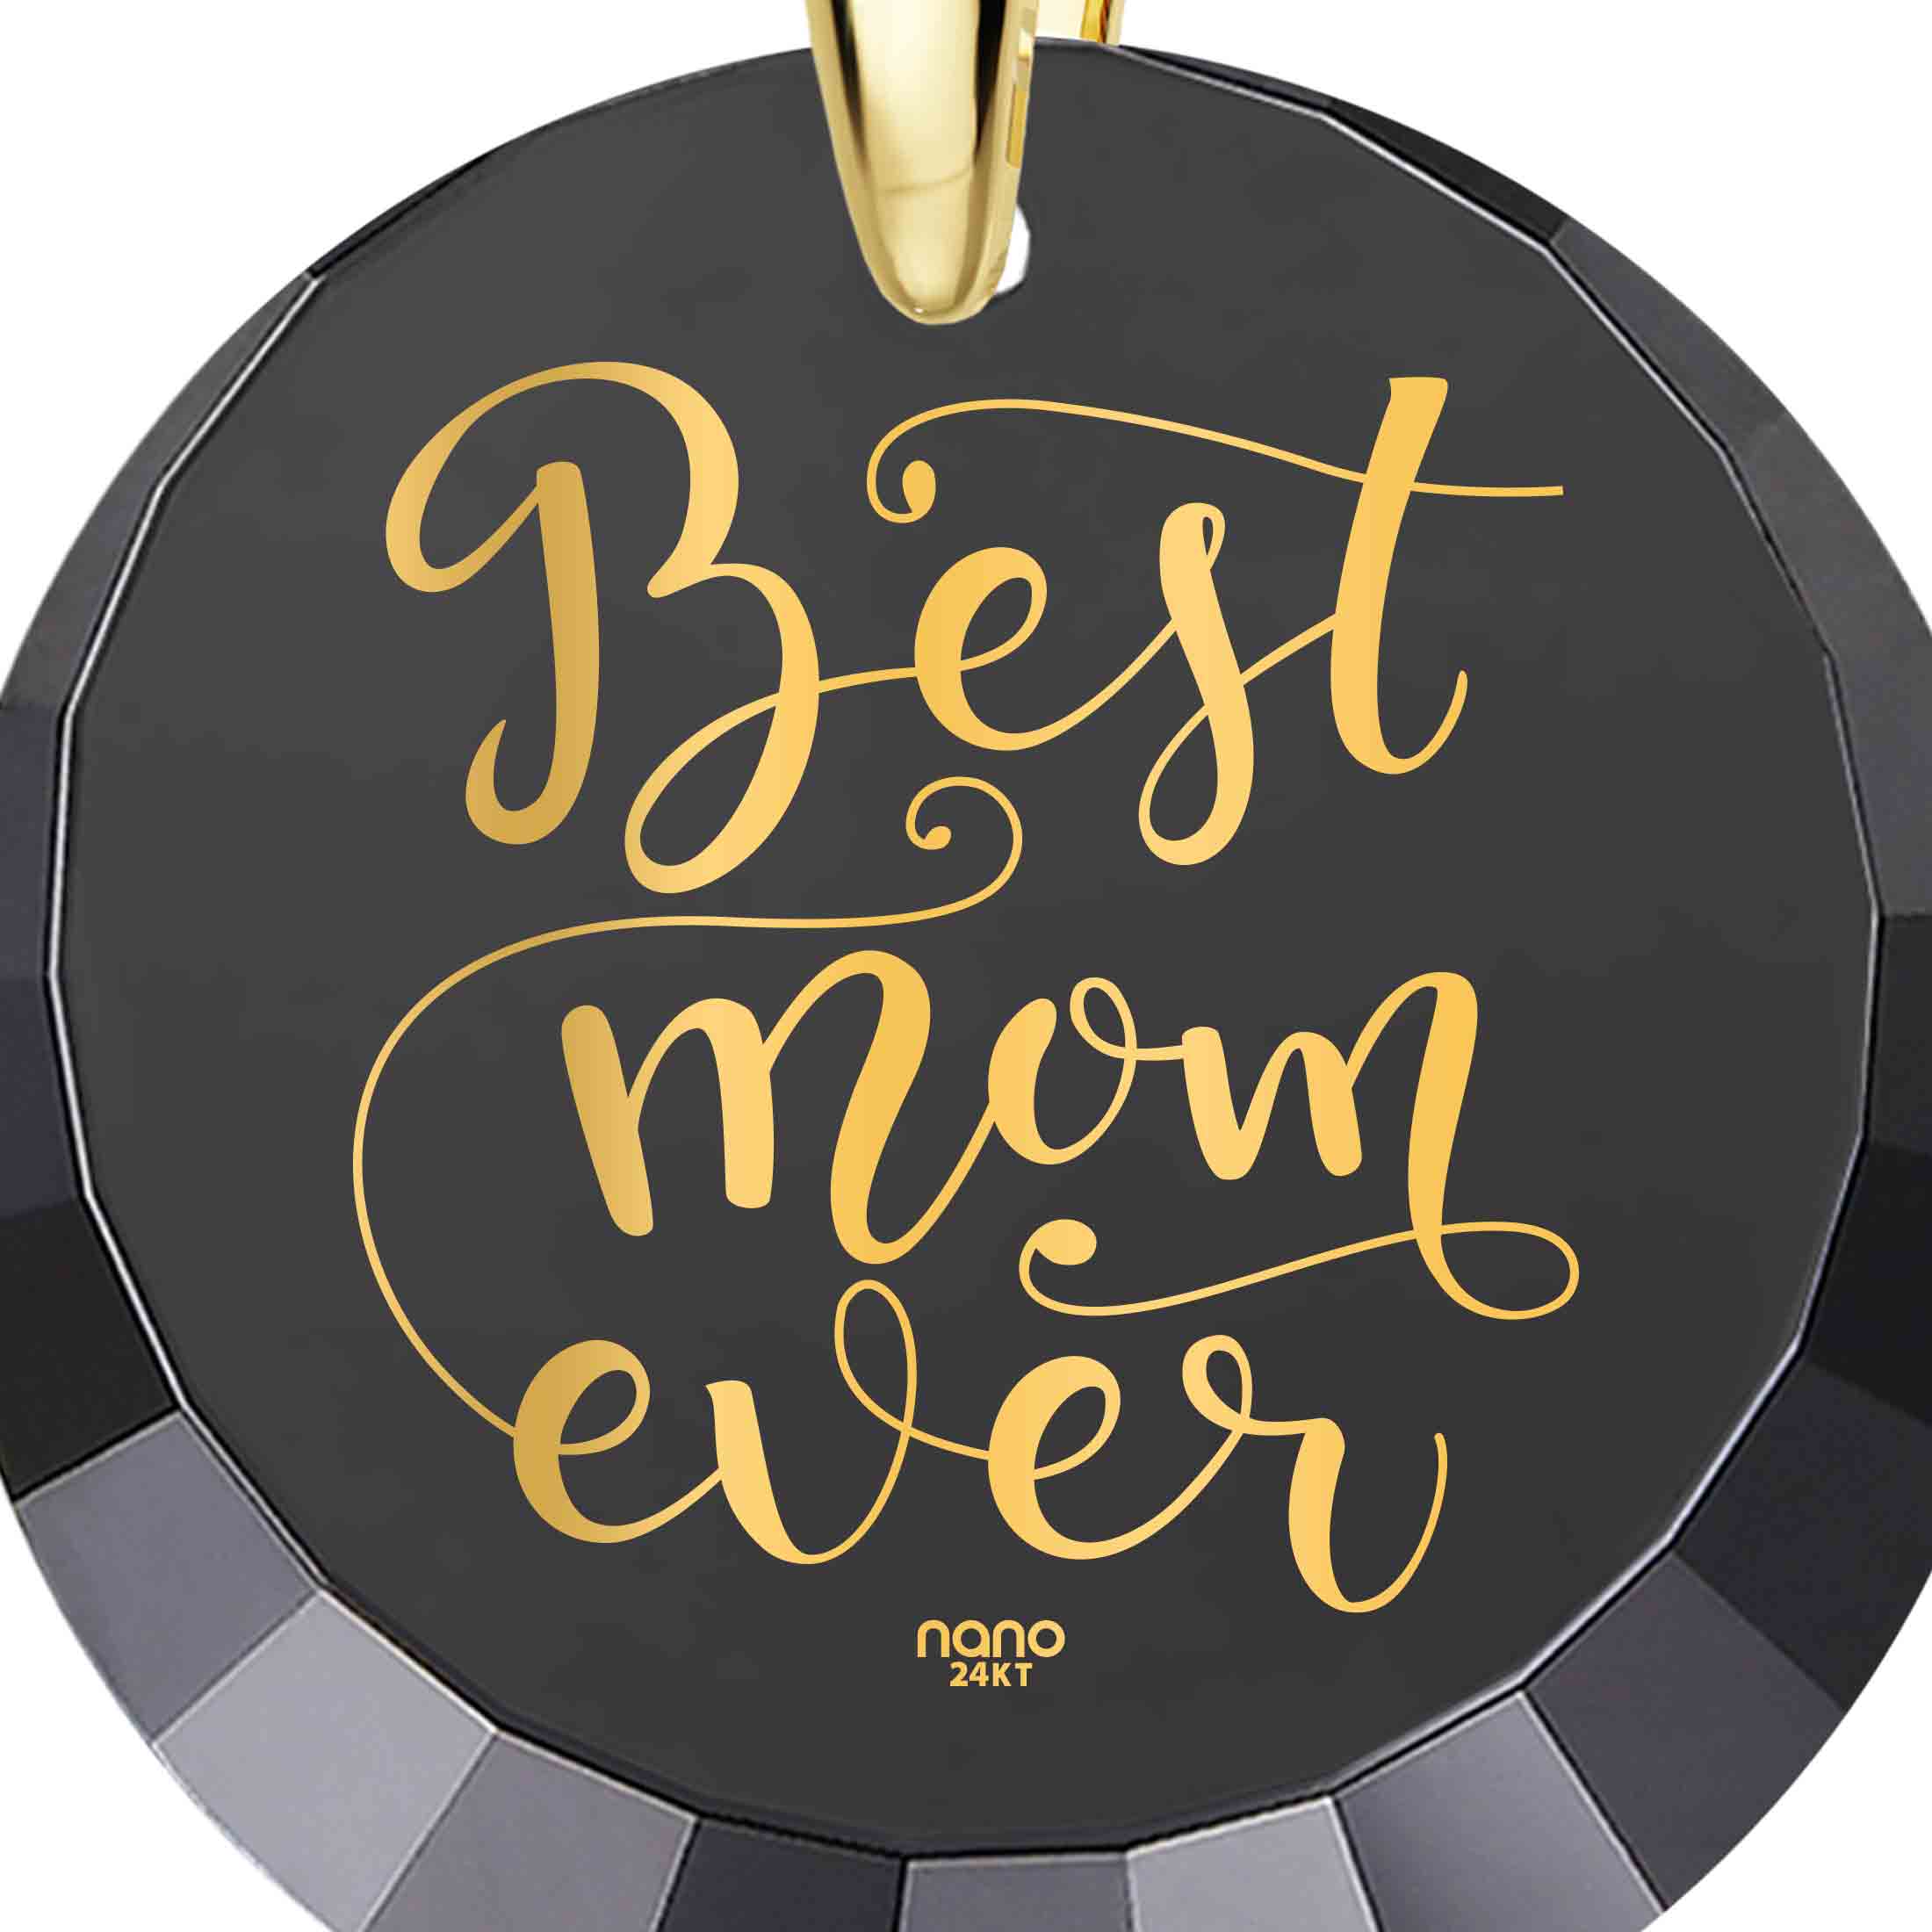 Sterling silver and gold pendant necklace with inscribed black disk reading "Best Mom Gold Plated Silver Necklace 24k Gold Inscribed - Mother's Birthday Gift" and a small gray tag marked "nano".